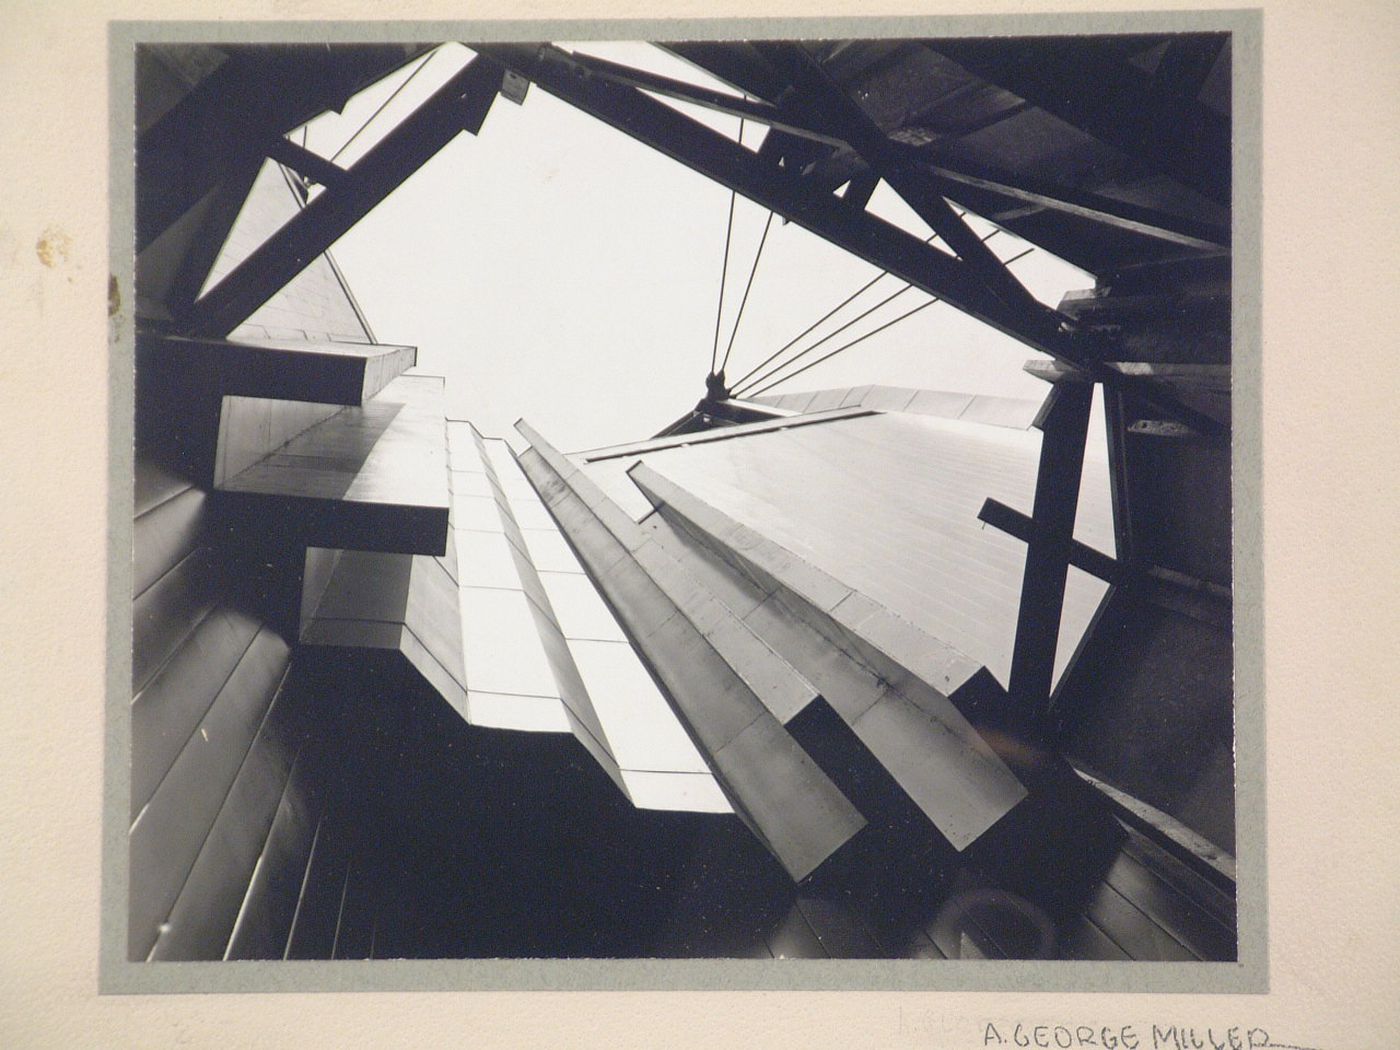 Interior view of the Travel and Transport Building showing the cable structure and roof under construction [?], 1933-1934 Chicago Century of Progress Exhibition, Burnham Park (now Meigs Field), Chicago, Illinois